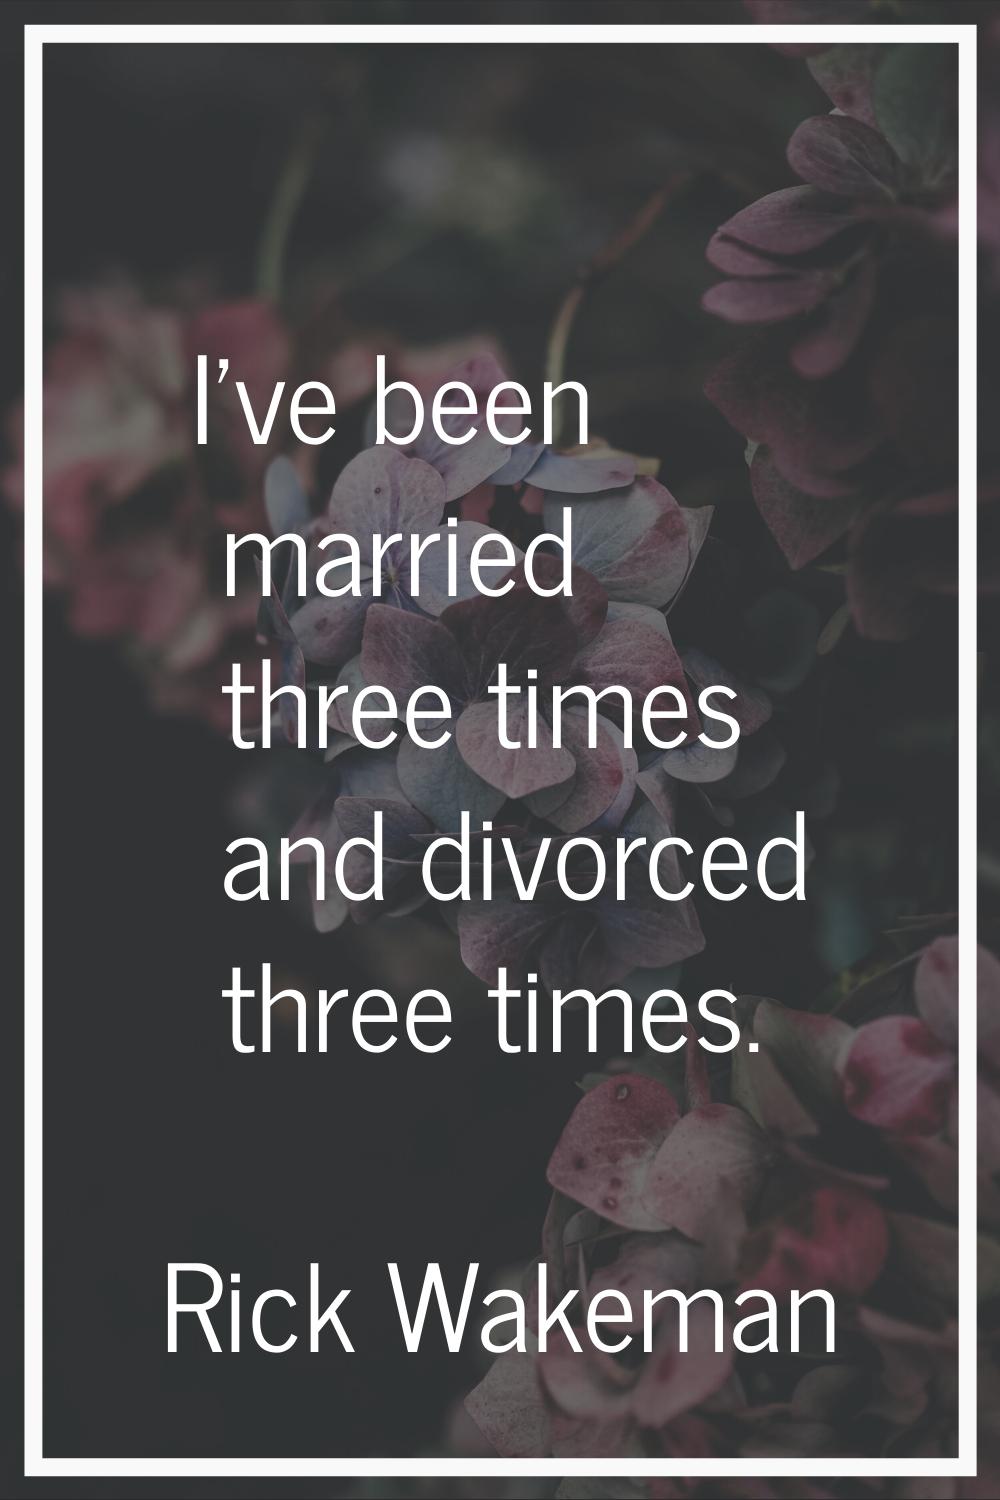 I've been married three times and divorced three times.